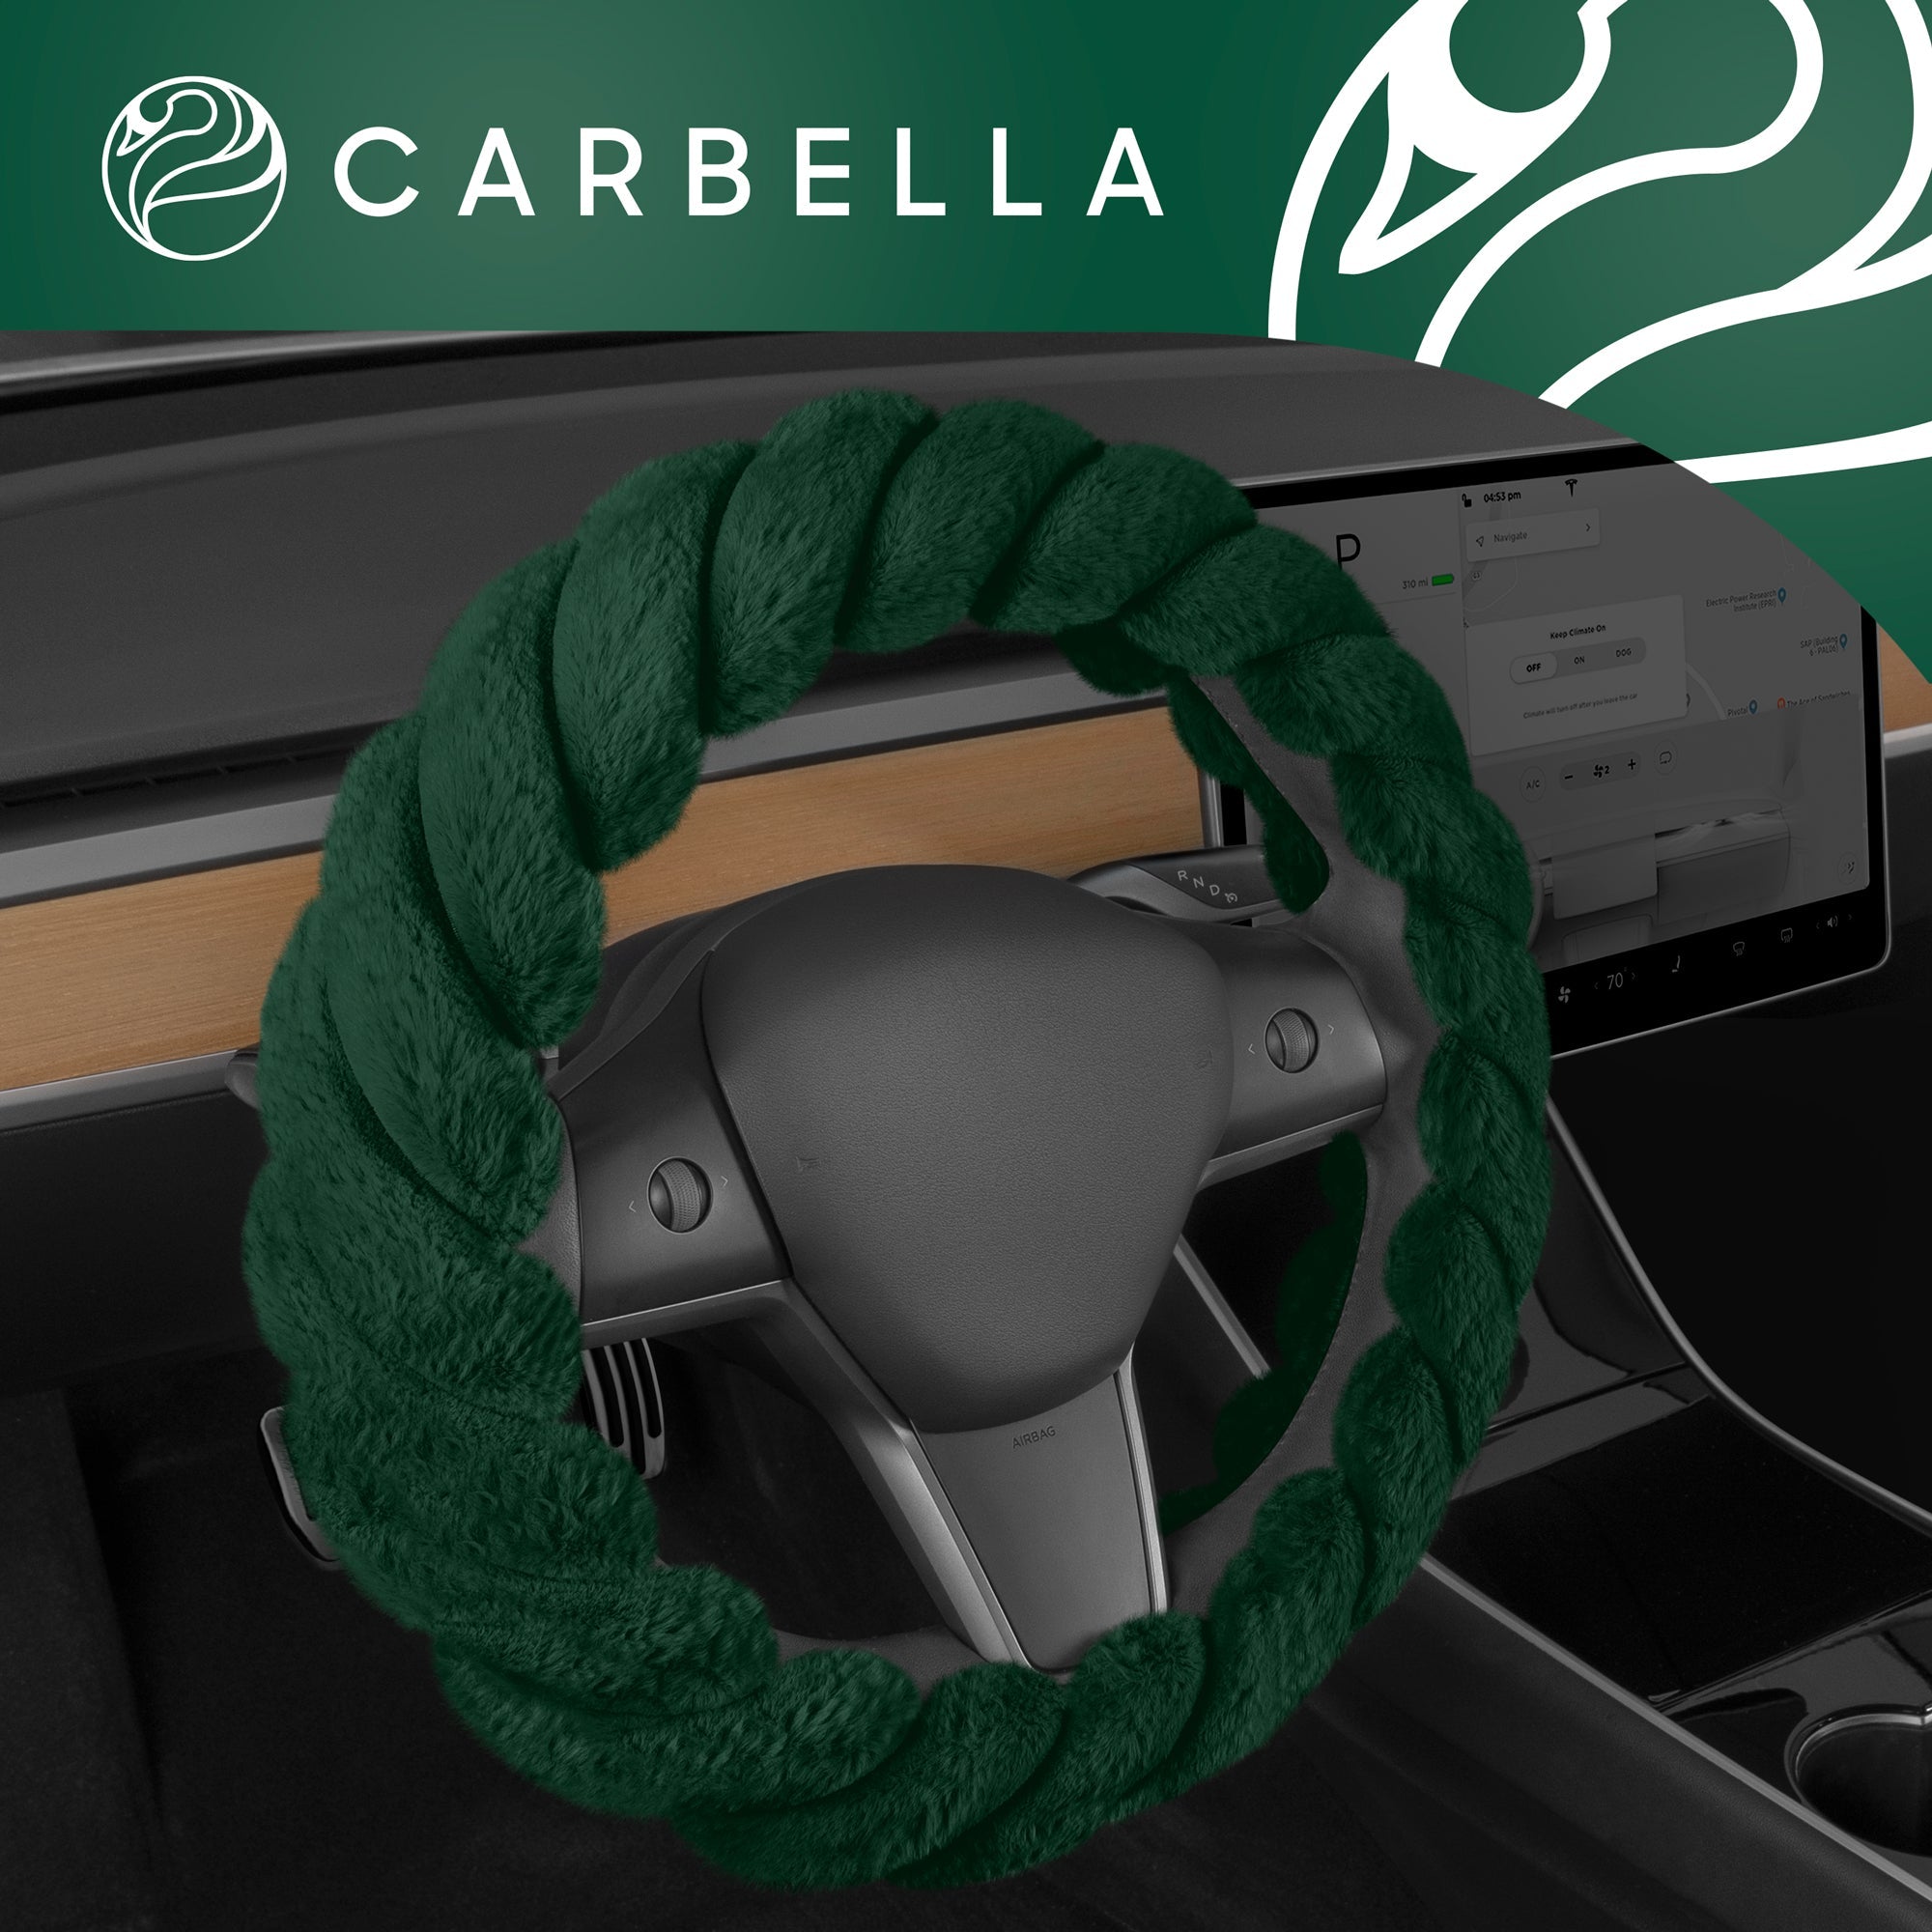 Carbella Twisted Fur Red Steering Wheel Cover, Standard 15 Inch Size Fits Most Vehicles, Fuzzy Fluffy Car Steering Cover with Soft Faux Fur Touch, Car Accessories for Women - Green